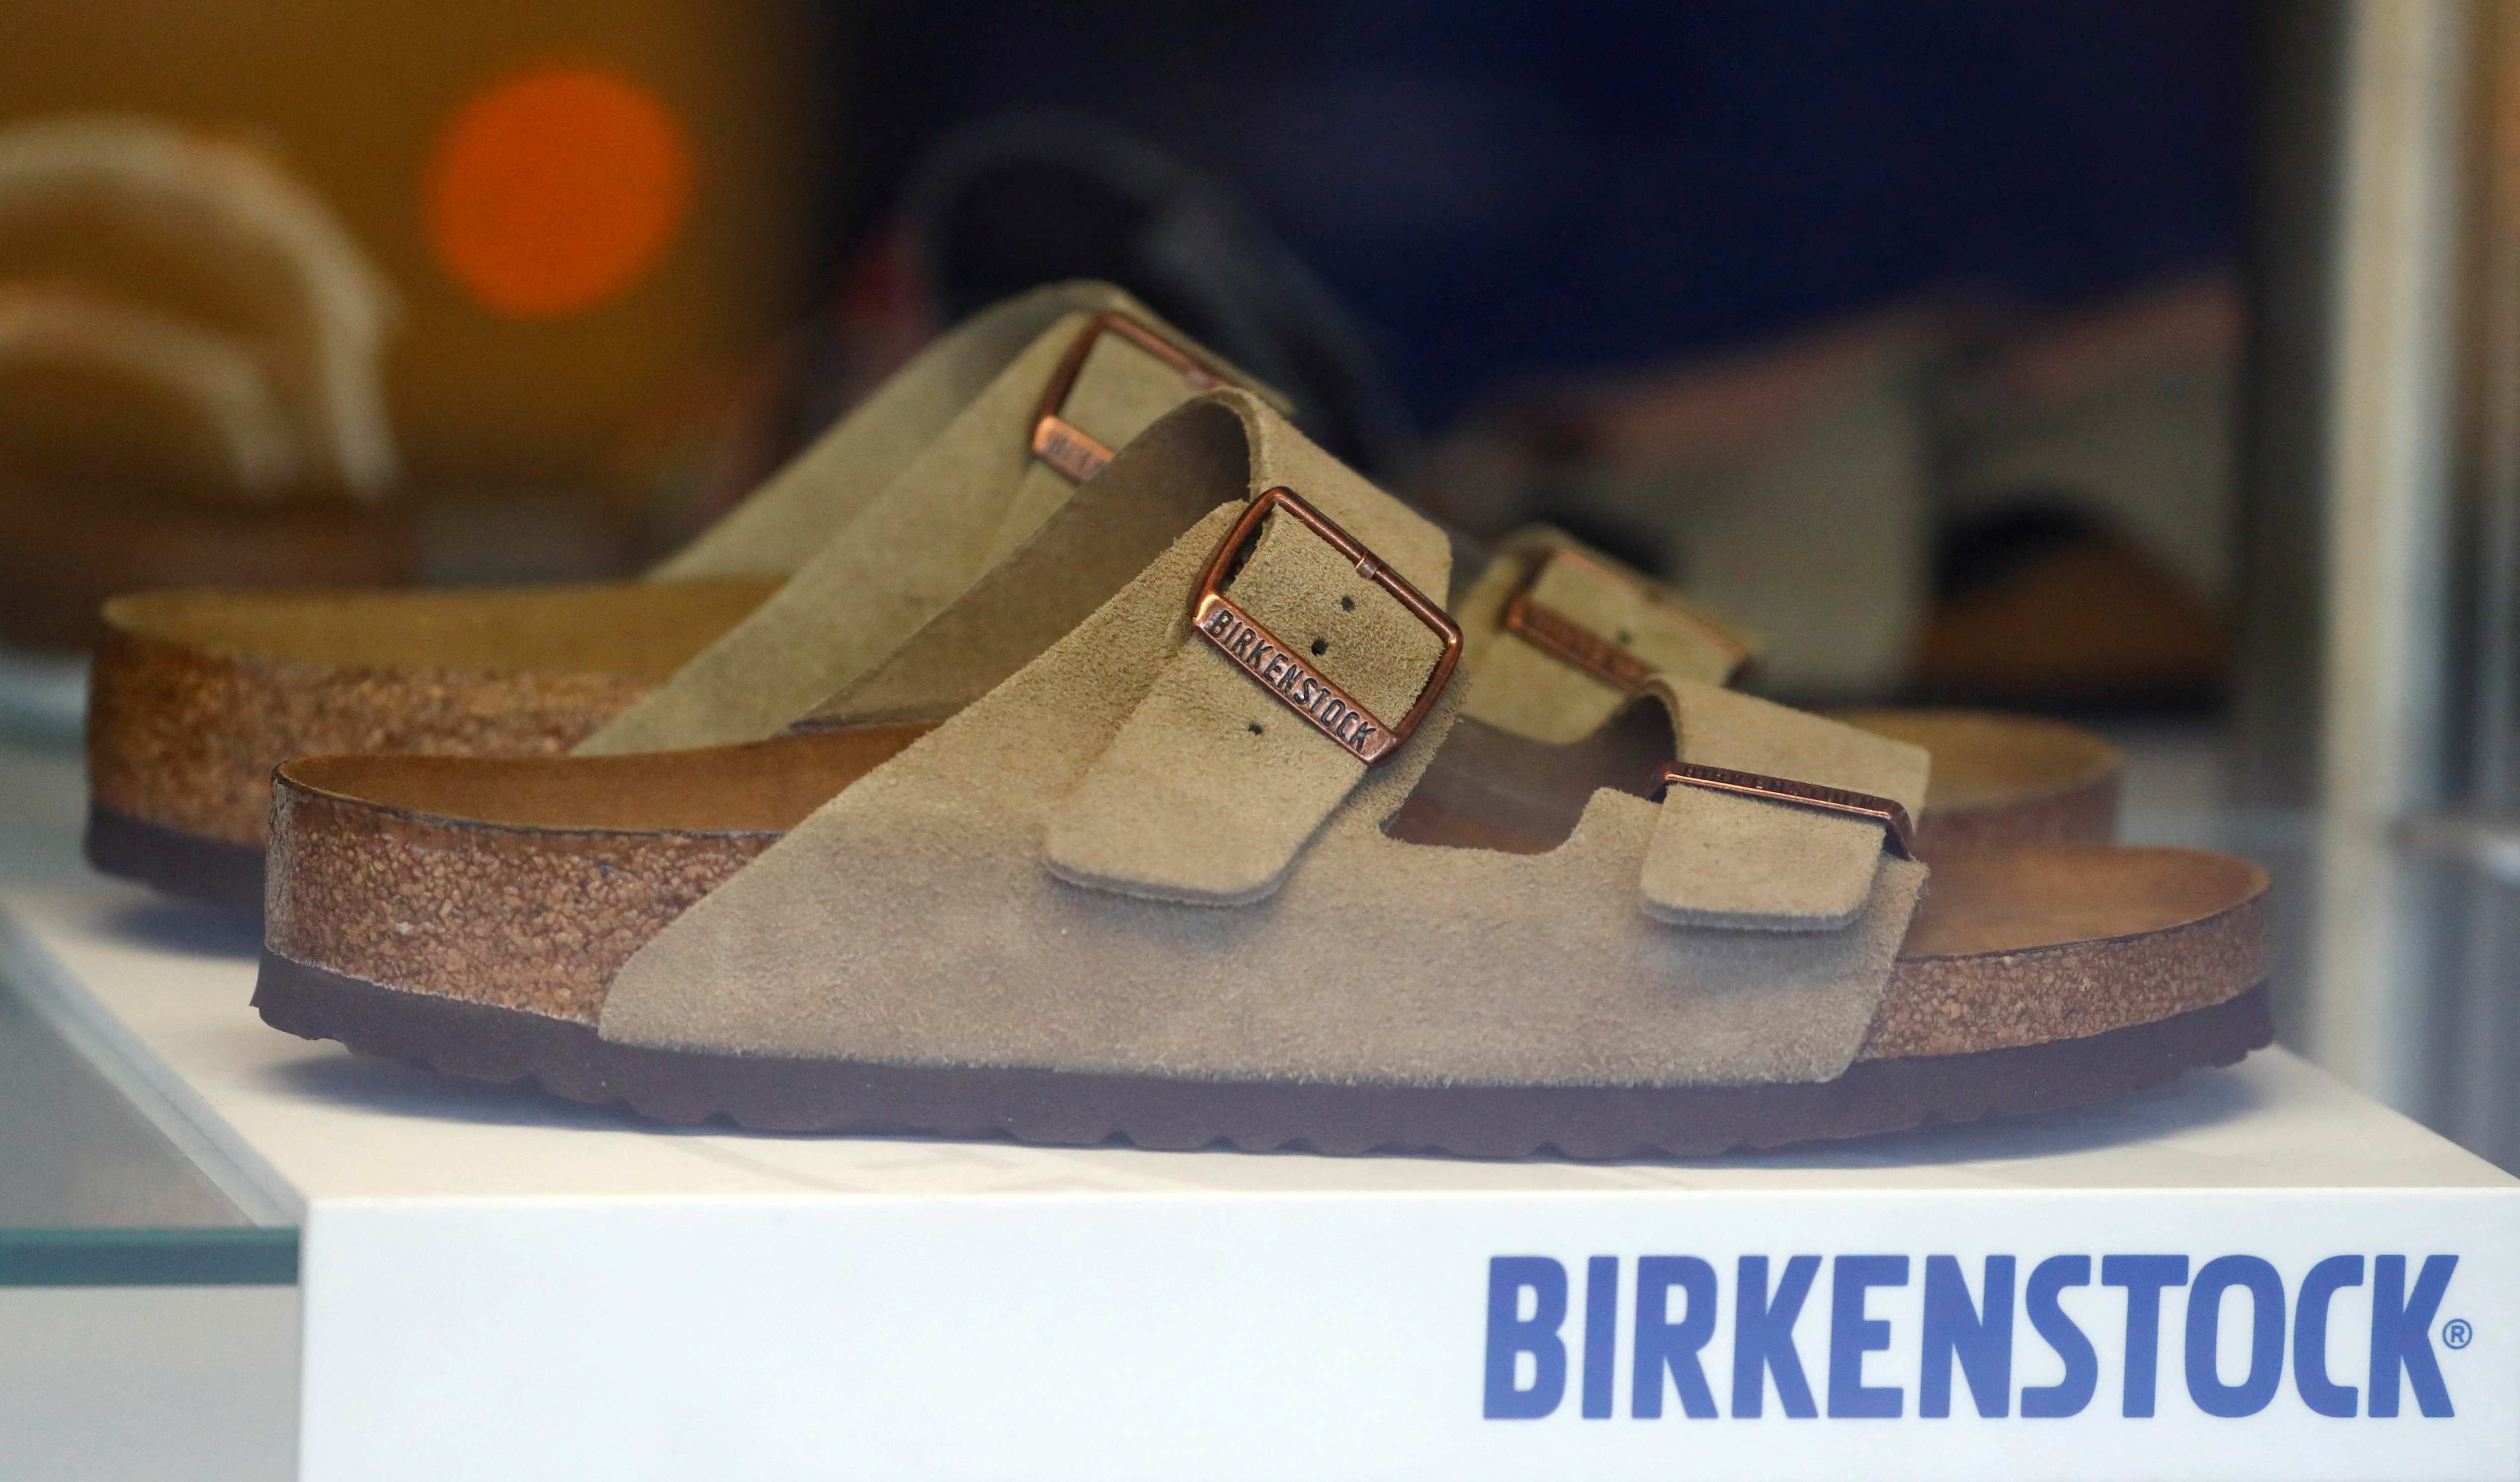 A pair of shoes is pictured in a window of a Birkenstock footwear store in Berlin